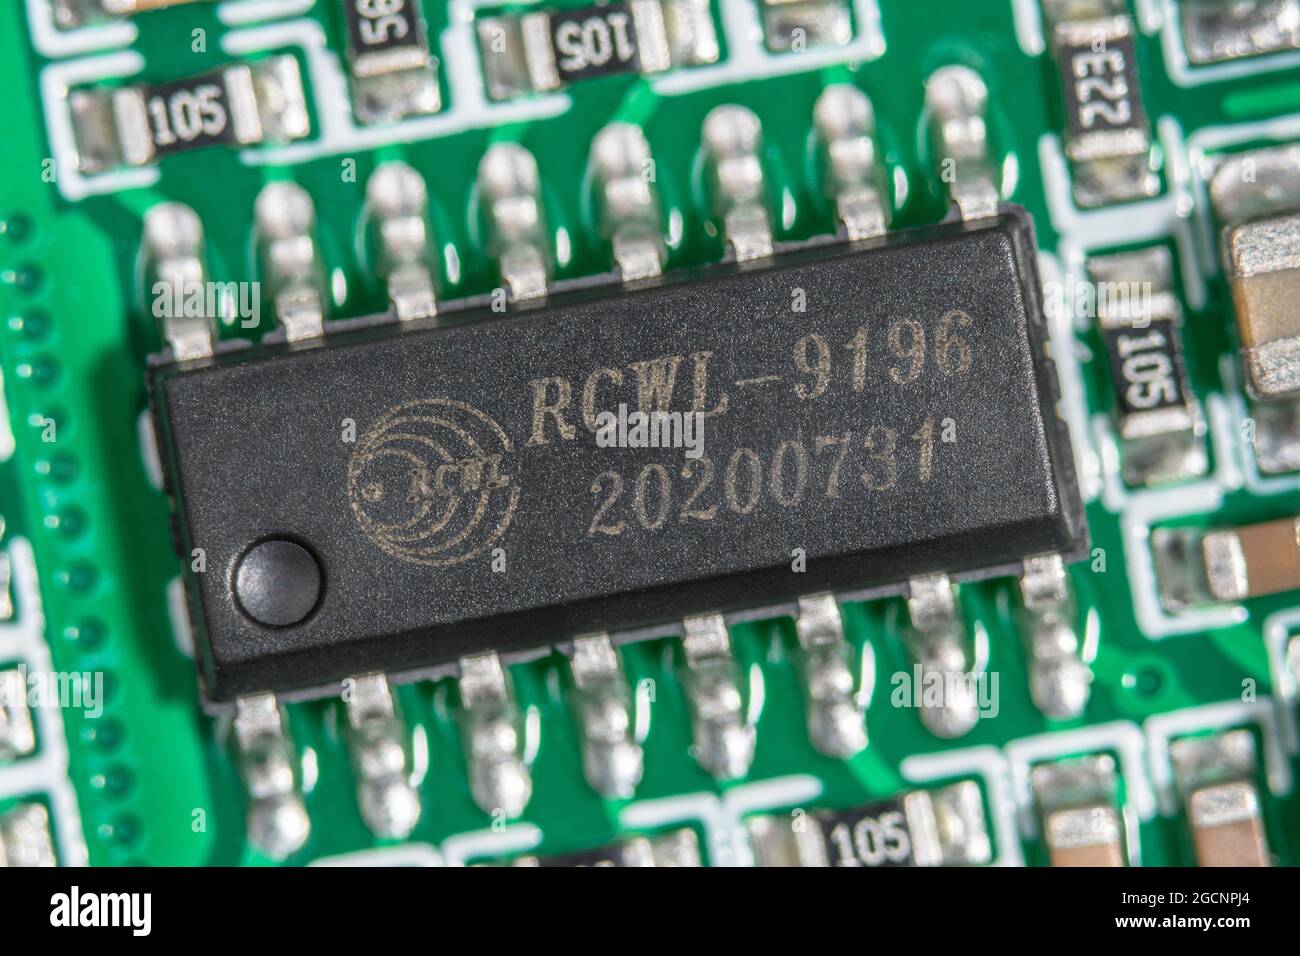 Macro close-up shot of small body motion sensor circuit board pcb. IC chip RCWL-0516 is a transmission signal processing control chip. Stock Photo